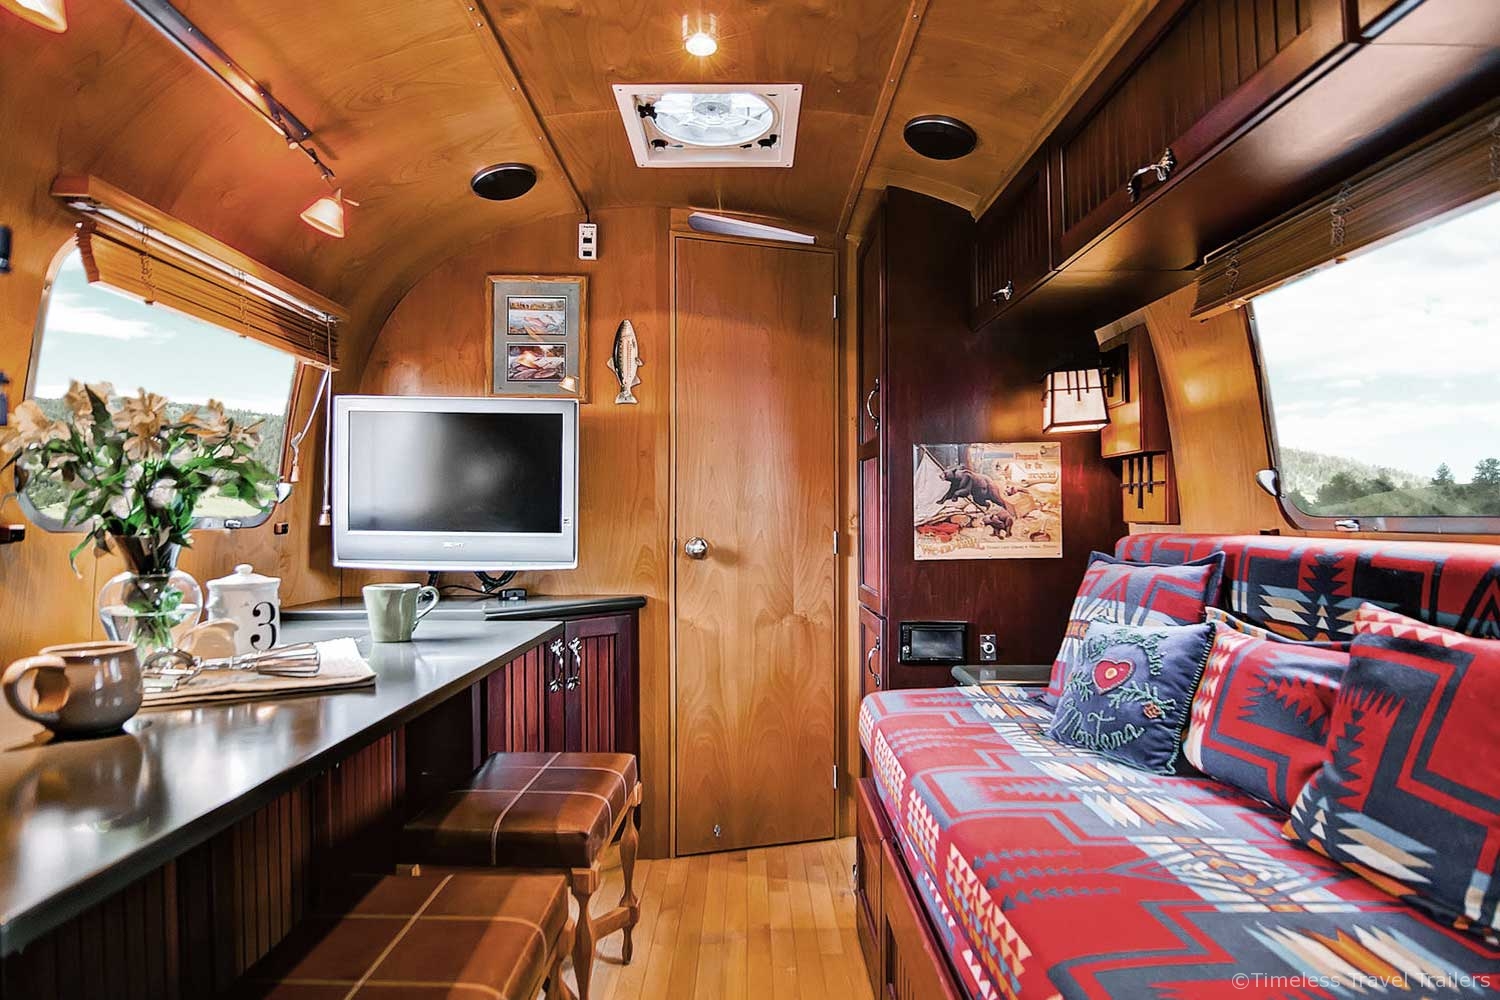 The Stardust Airstream - Custom built by Timeless Travel Trailer